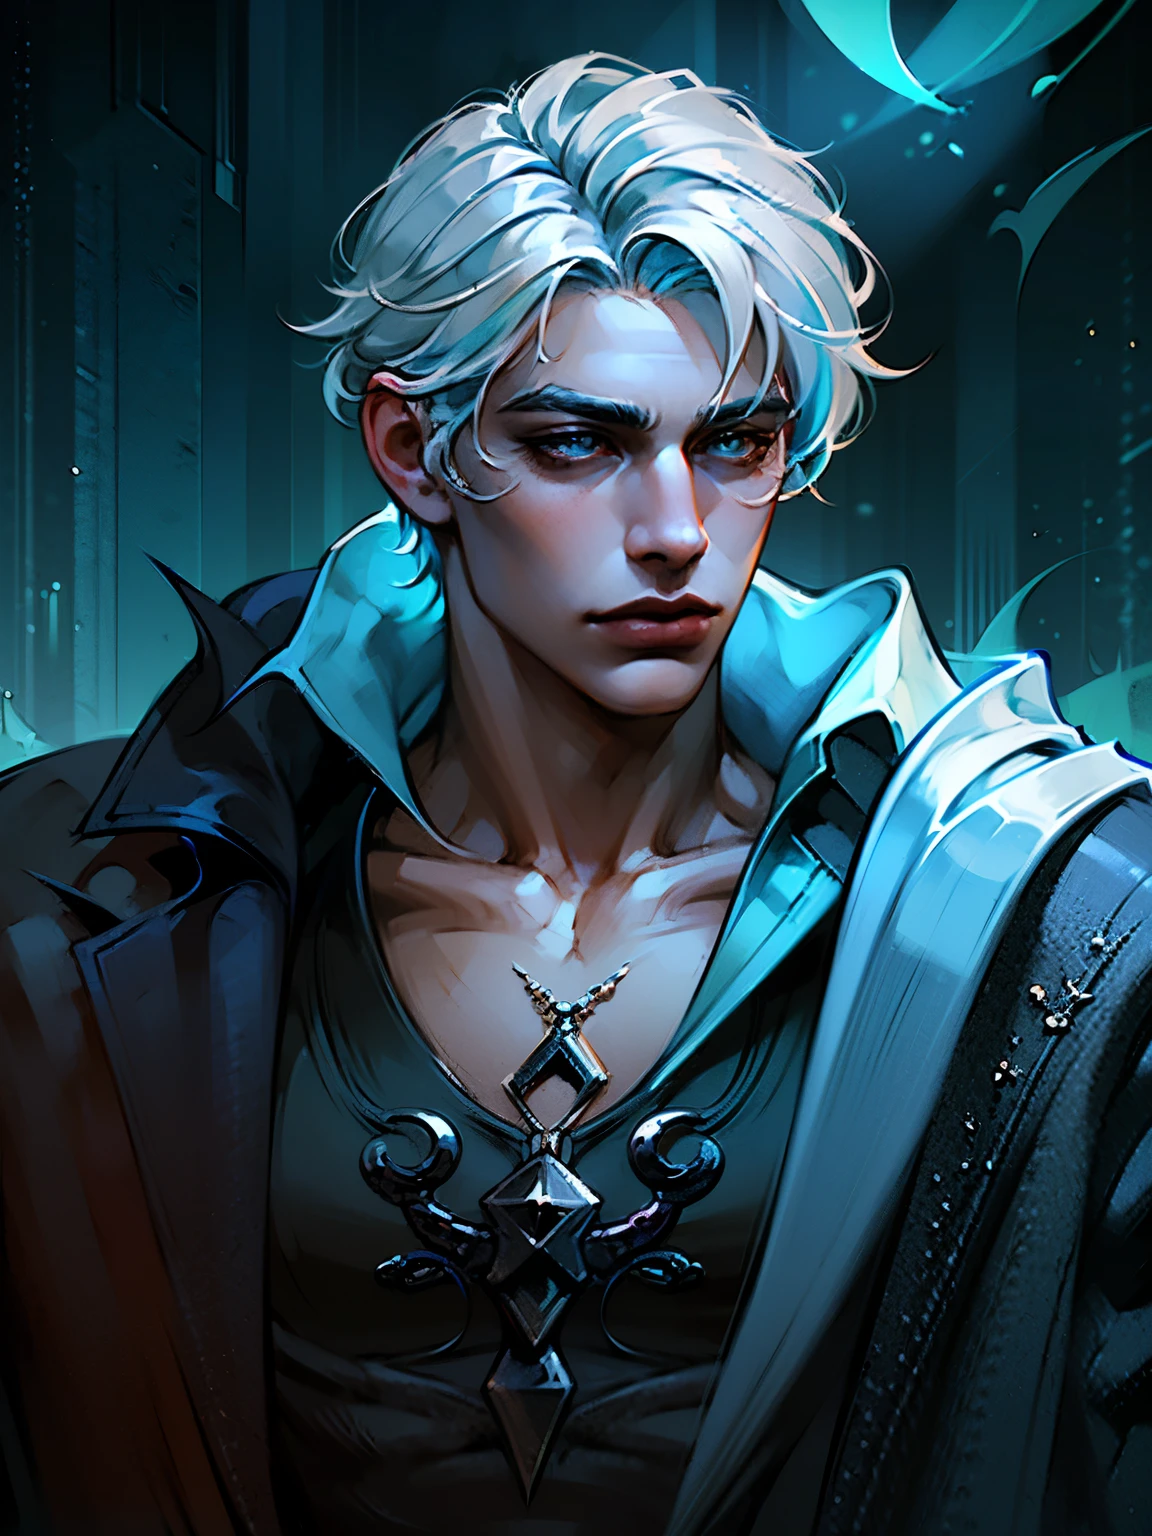 man:1.5,1 man,(male,muscle,1boy, 1 boy, man chest, muscular), 25 year old man,young,((1male,1 male,1man,man,male gender:1.5,handsome man,male focus)), cardcaster warlock characster portrait, illustation modern digital art style colorful, white hair